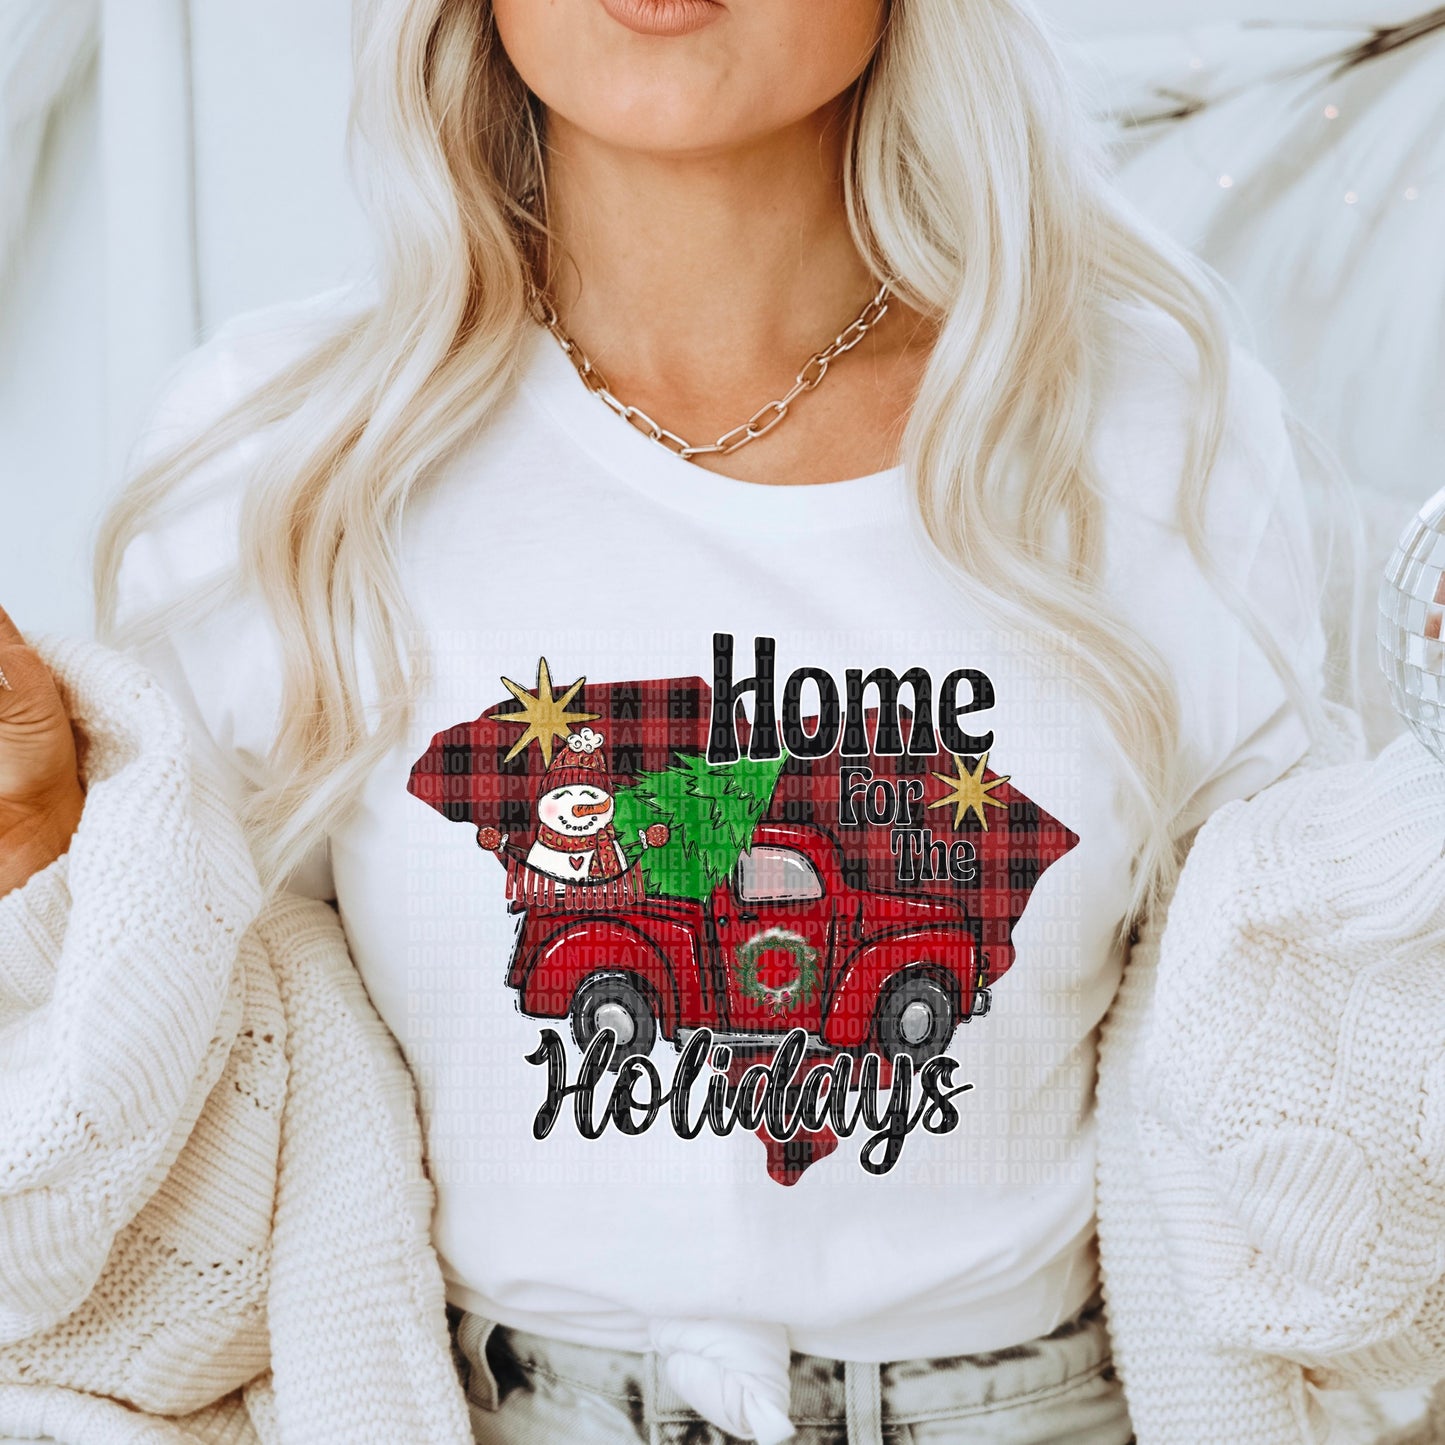 Home for the holidays(All states available)